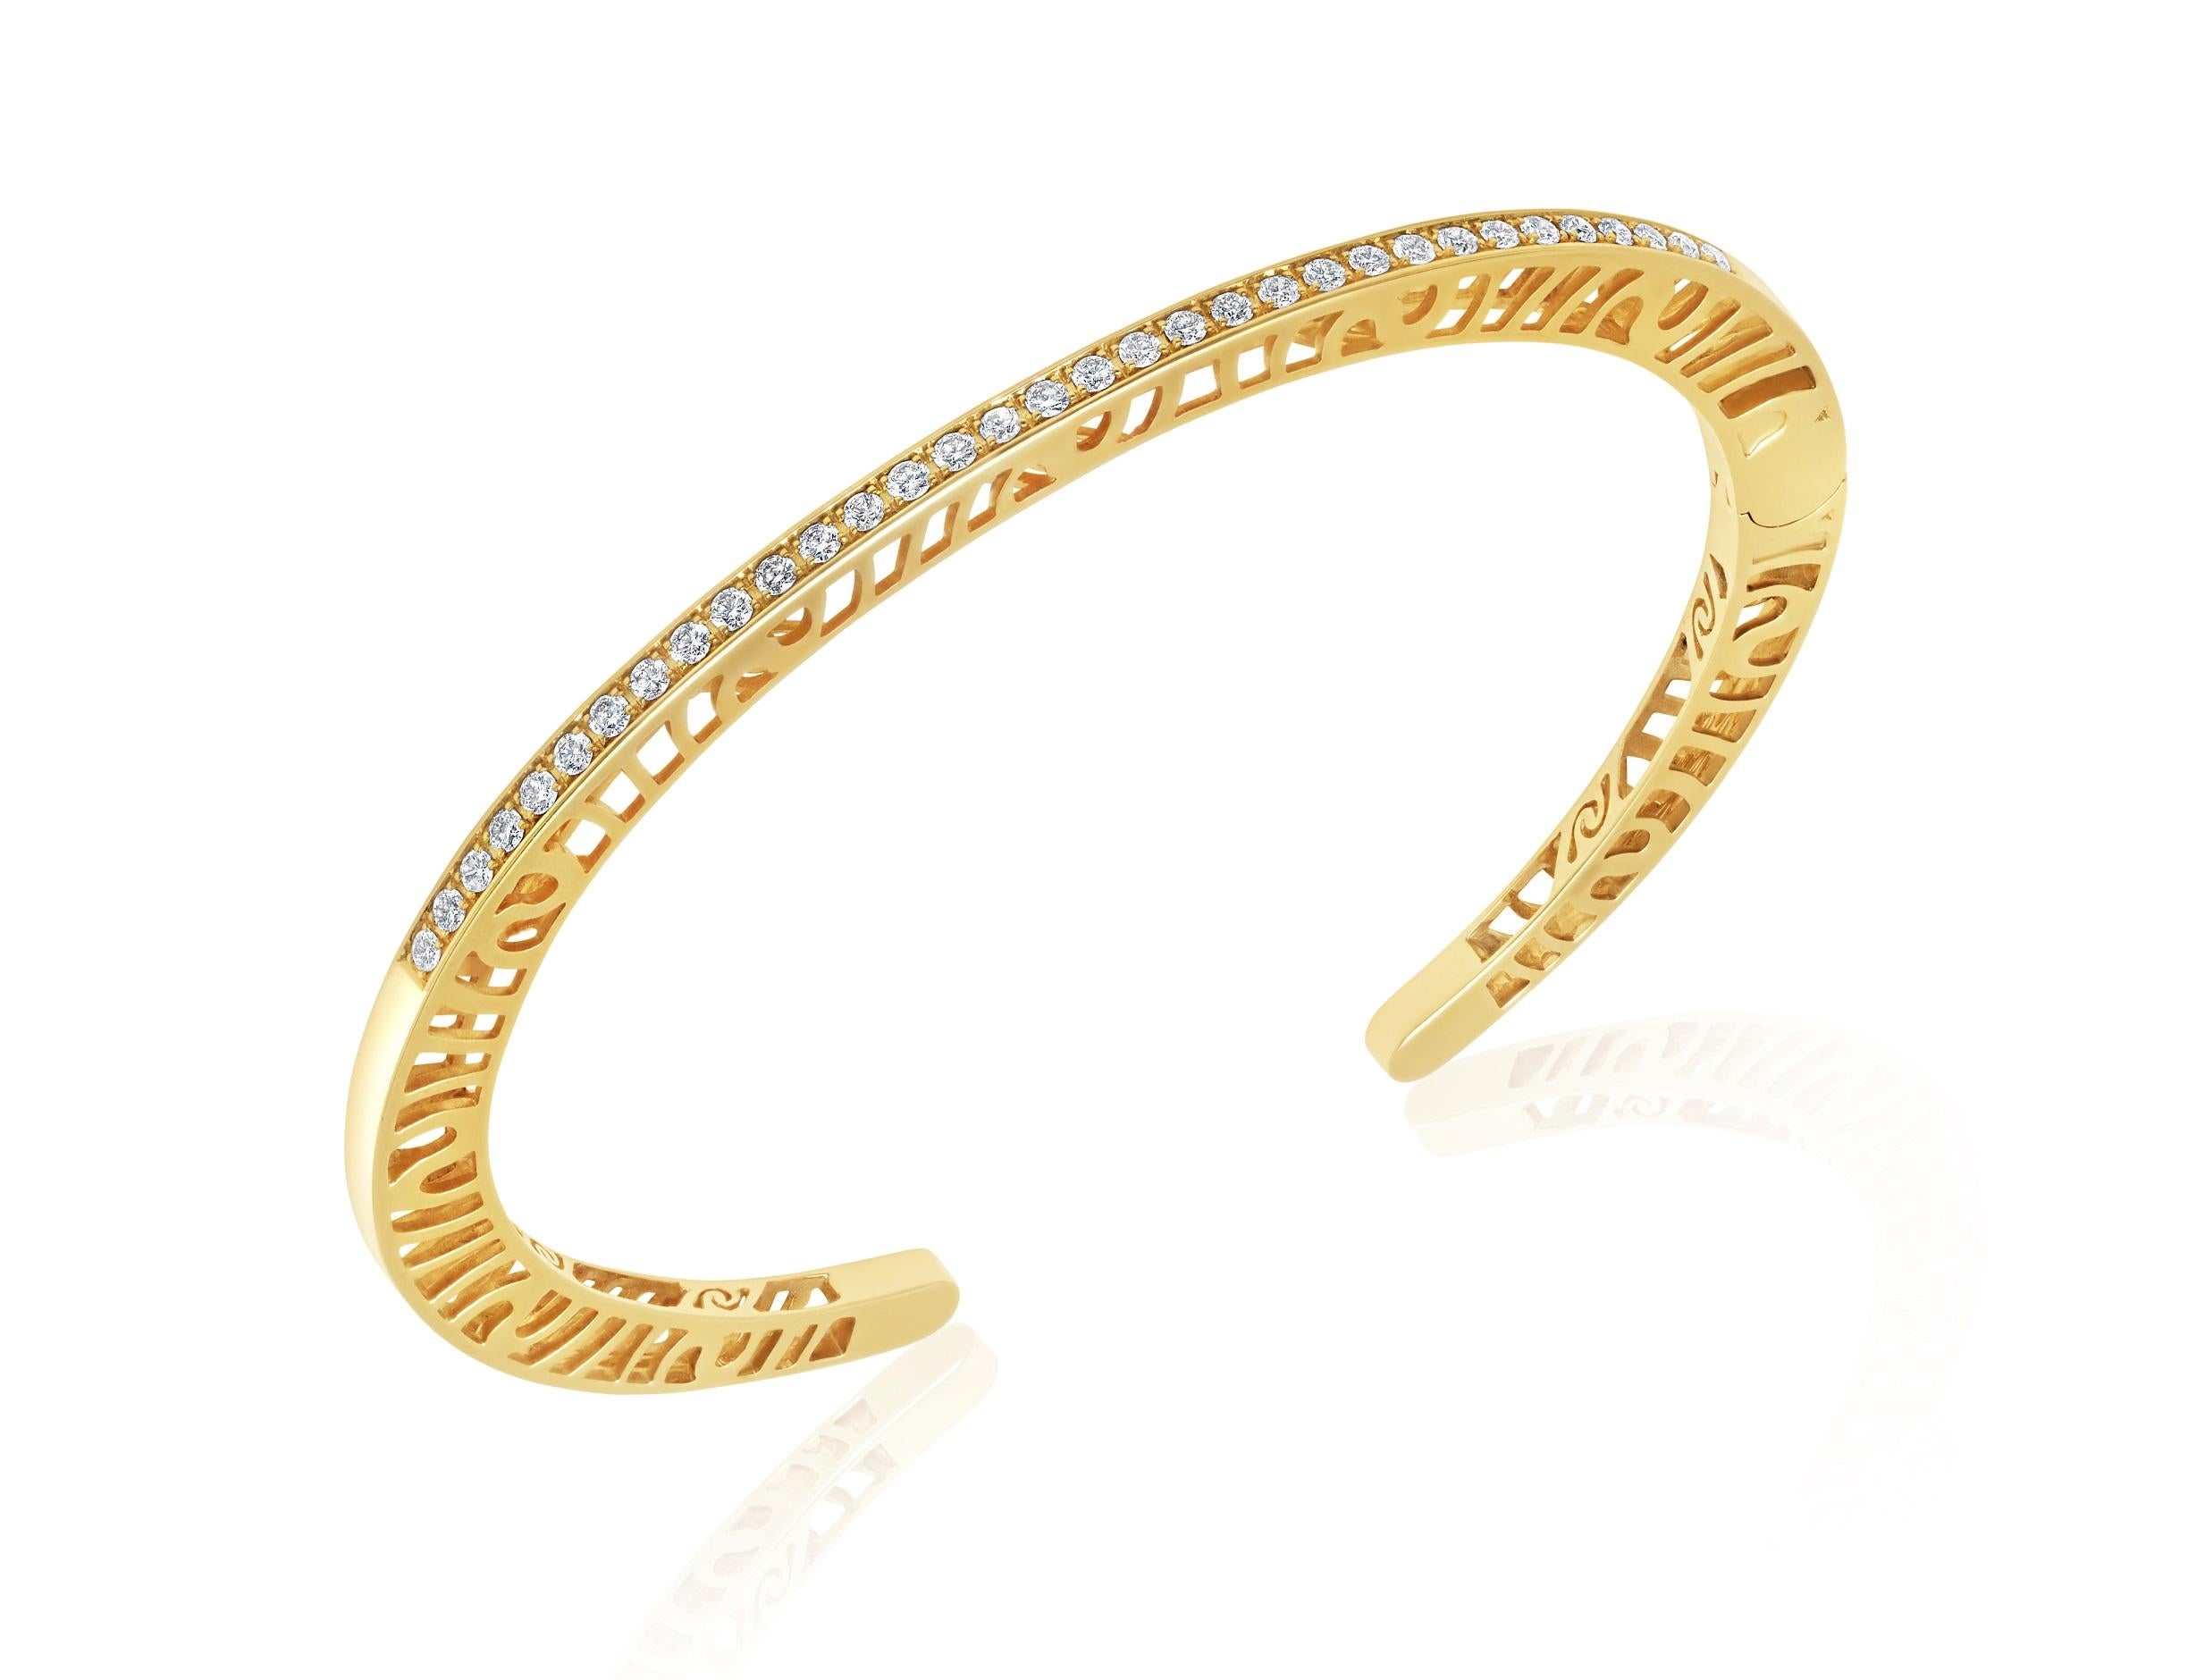 The 3mm wide, 14ky gold and diamond stacking cuff from the Shooting Stars Collection is available for immediate purchase in a size medium. There are 33 diamonds (1.55 mm) that run along the top. Total carat weight is 0.69 cts.  
This cuff  is a